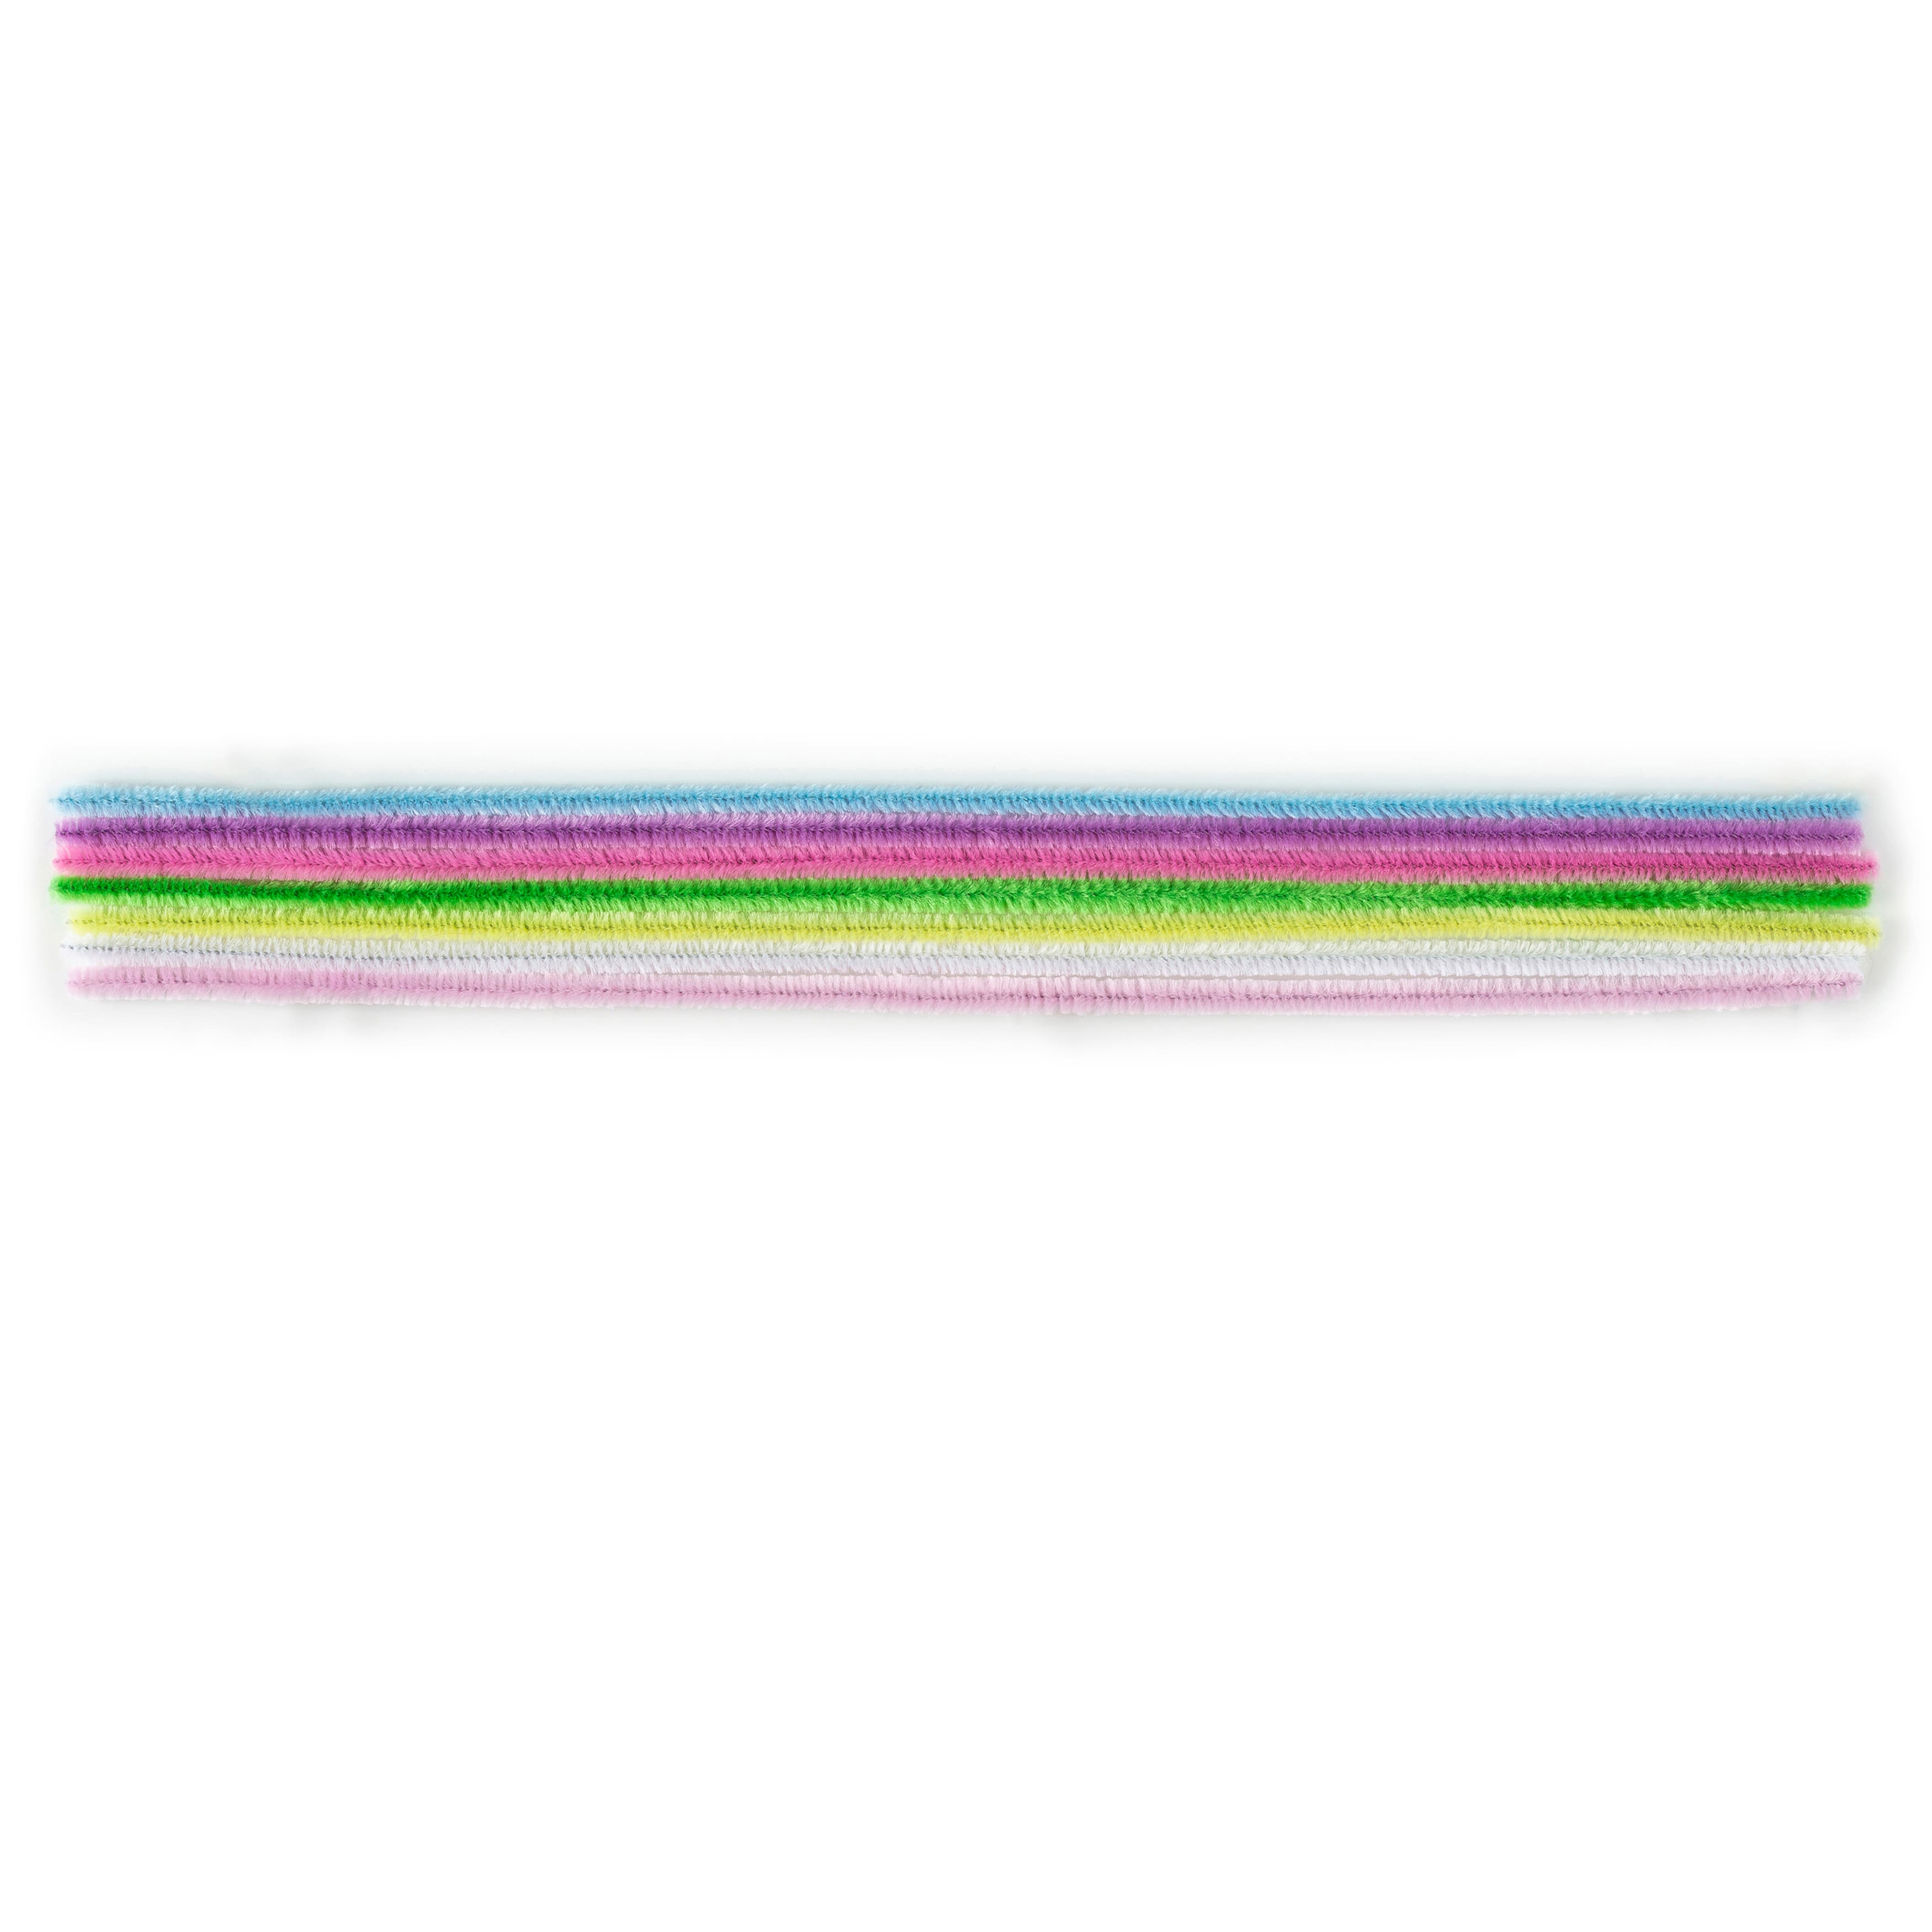 Pastel Bumpy Pipe Cleaners | 75 Pieces